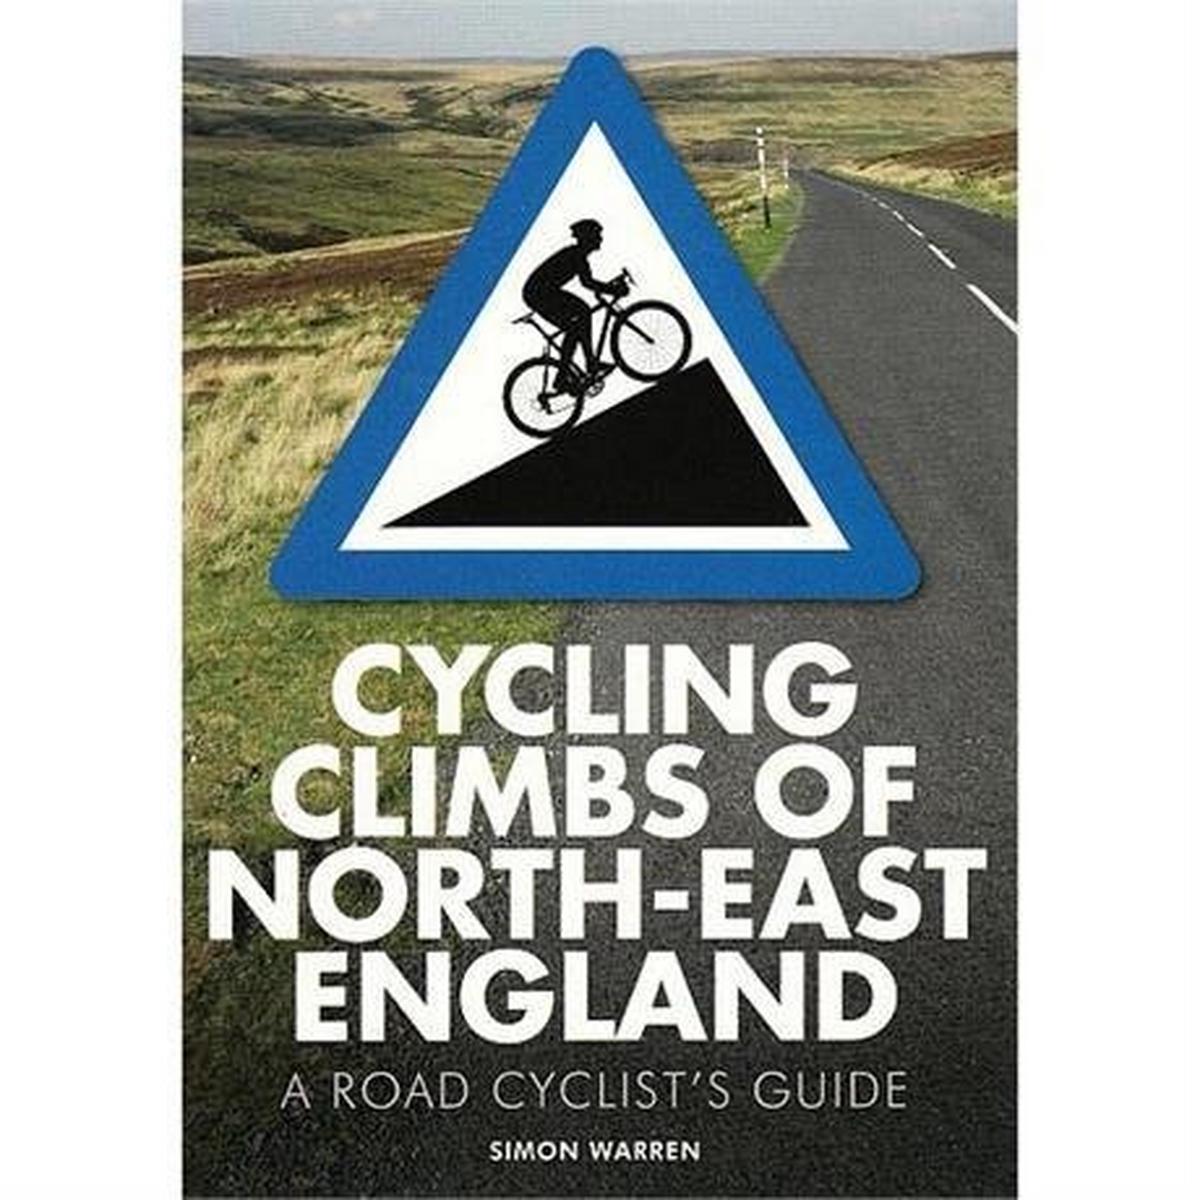 Miscellaneous Book: Cycling Climbs of North-East England